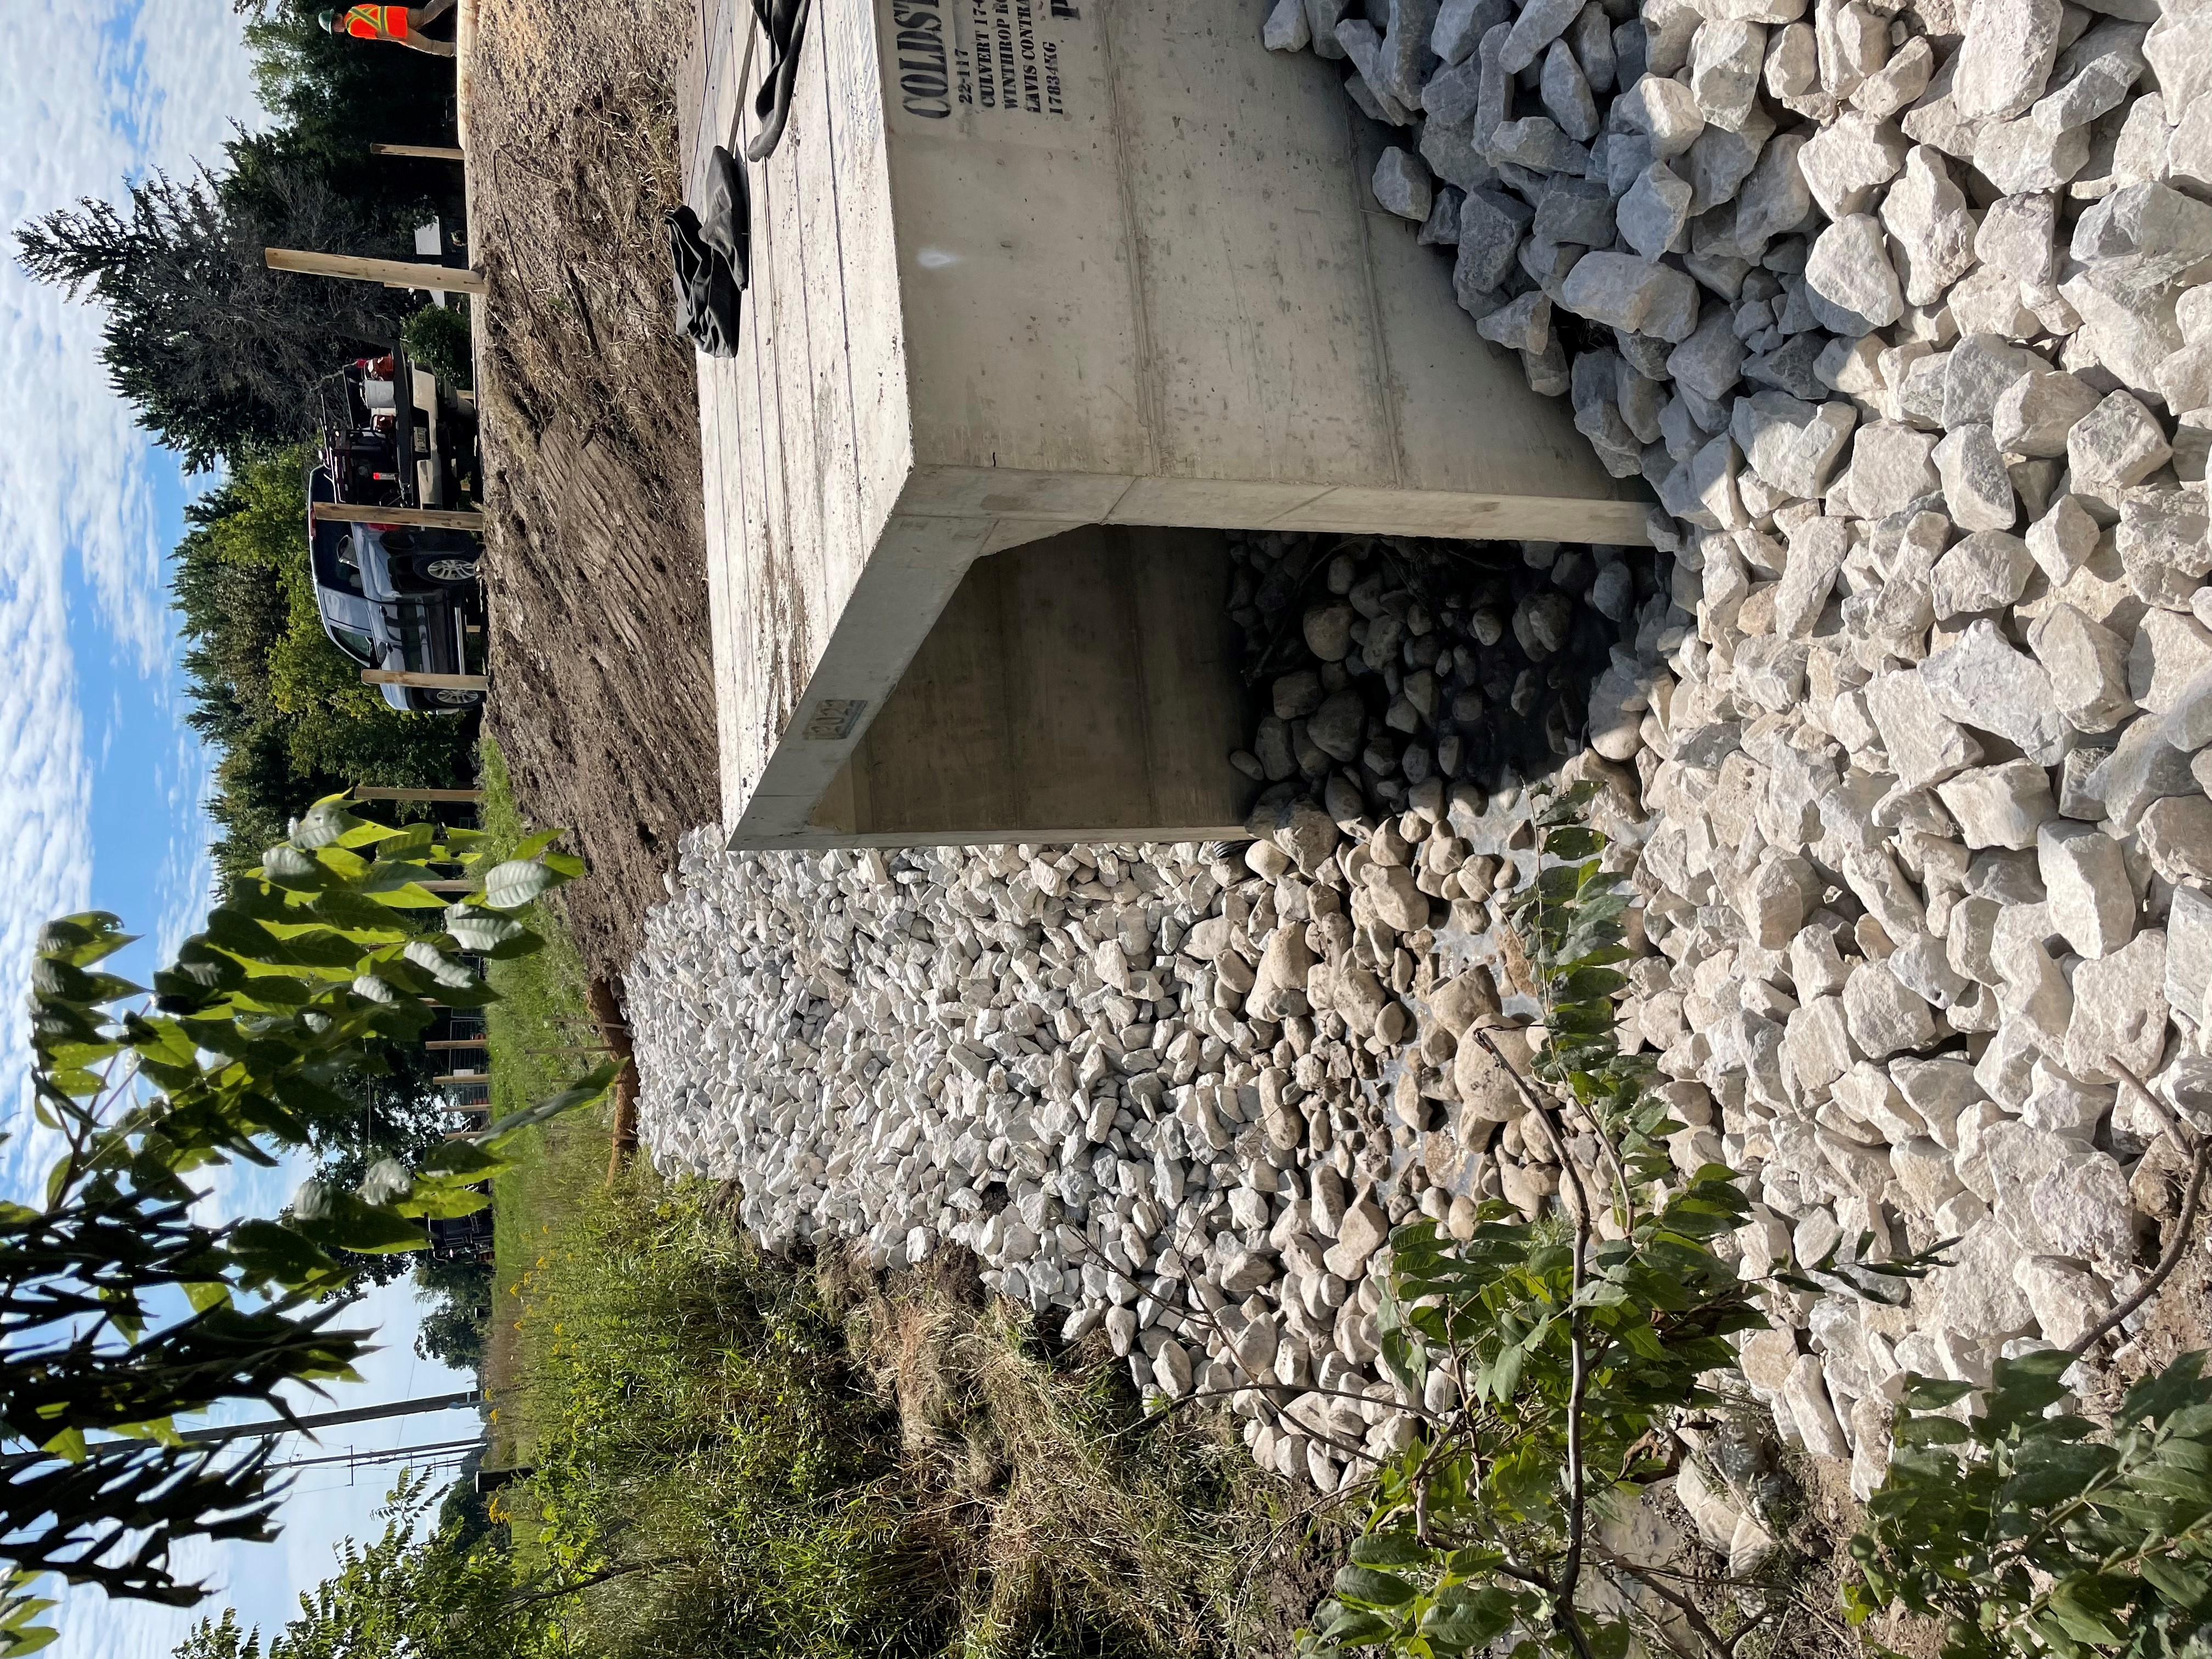 A culvert being inspected in Huron County